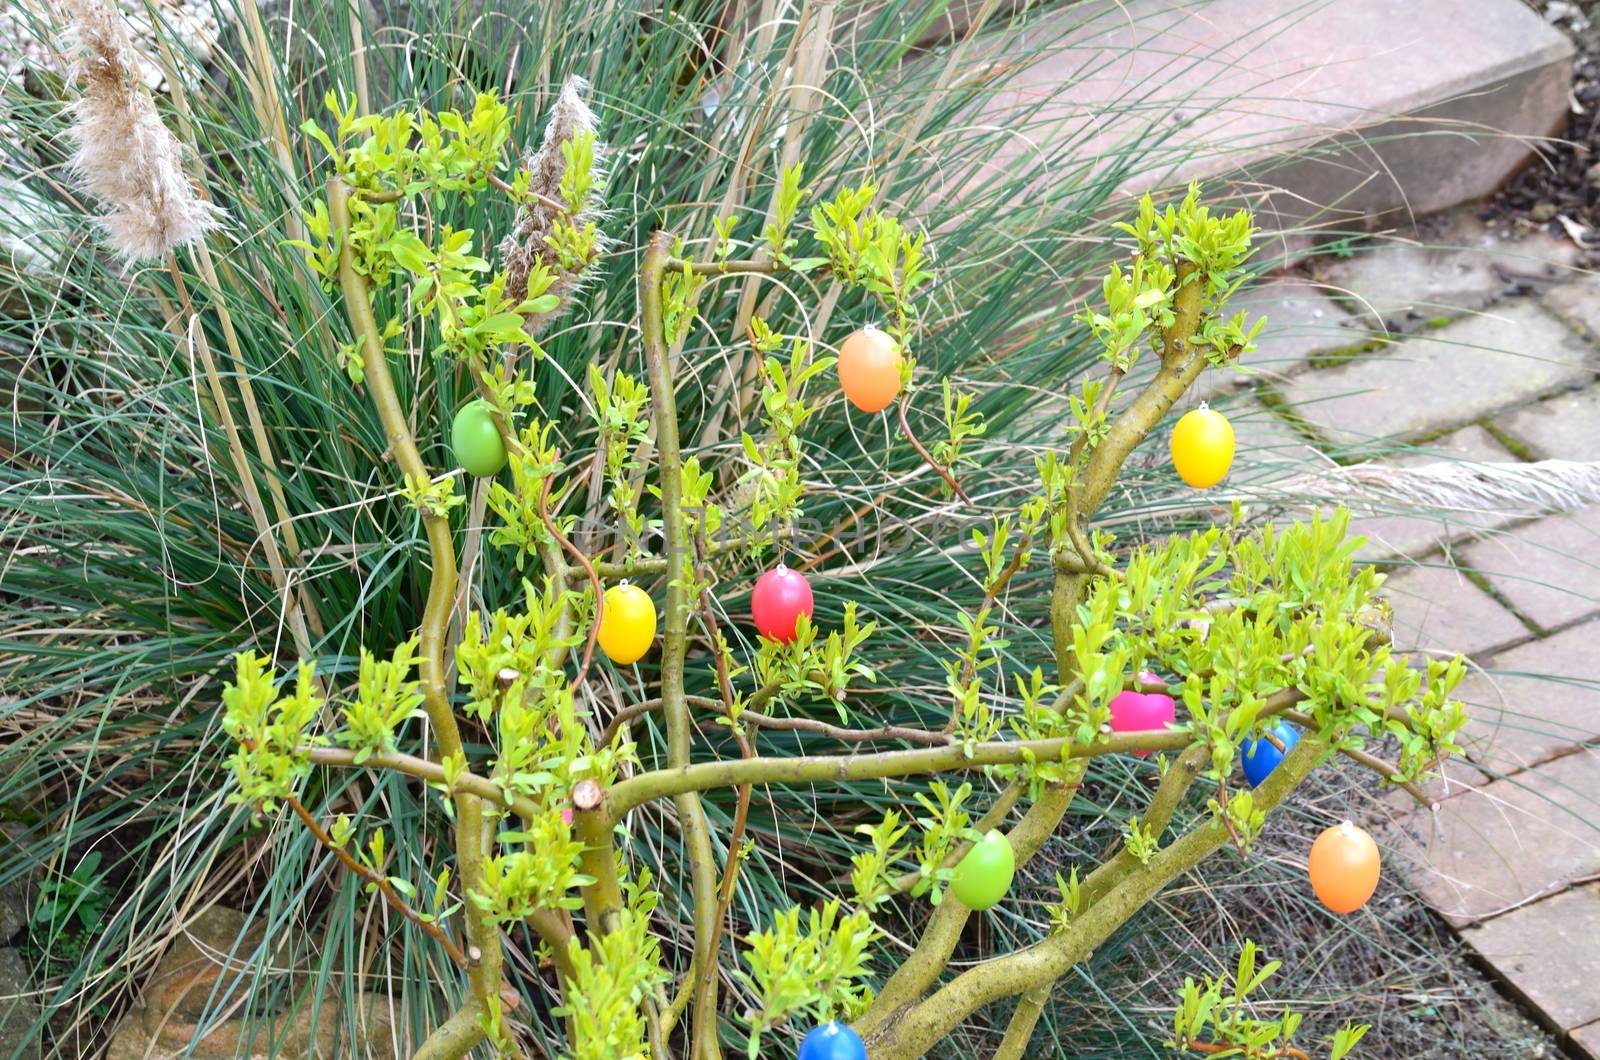  Easter tree, Easter shrub  with colored eggs by JFsPic